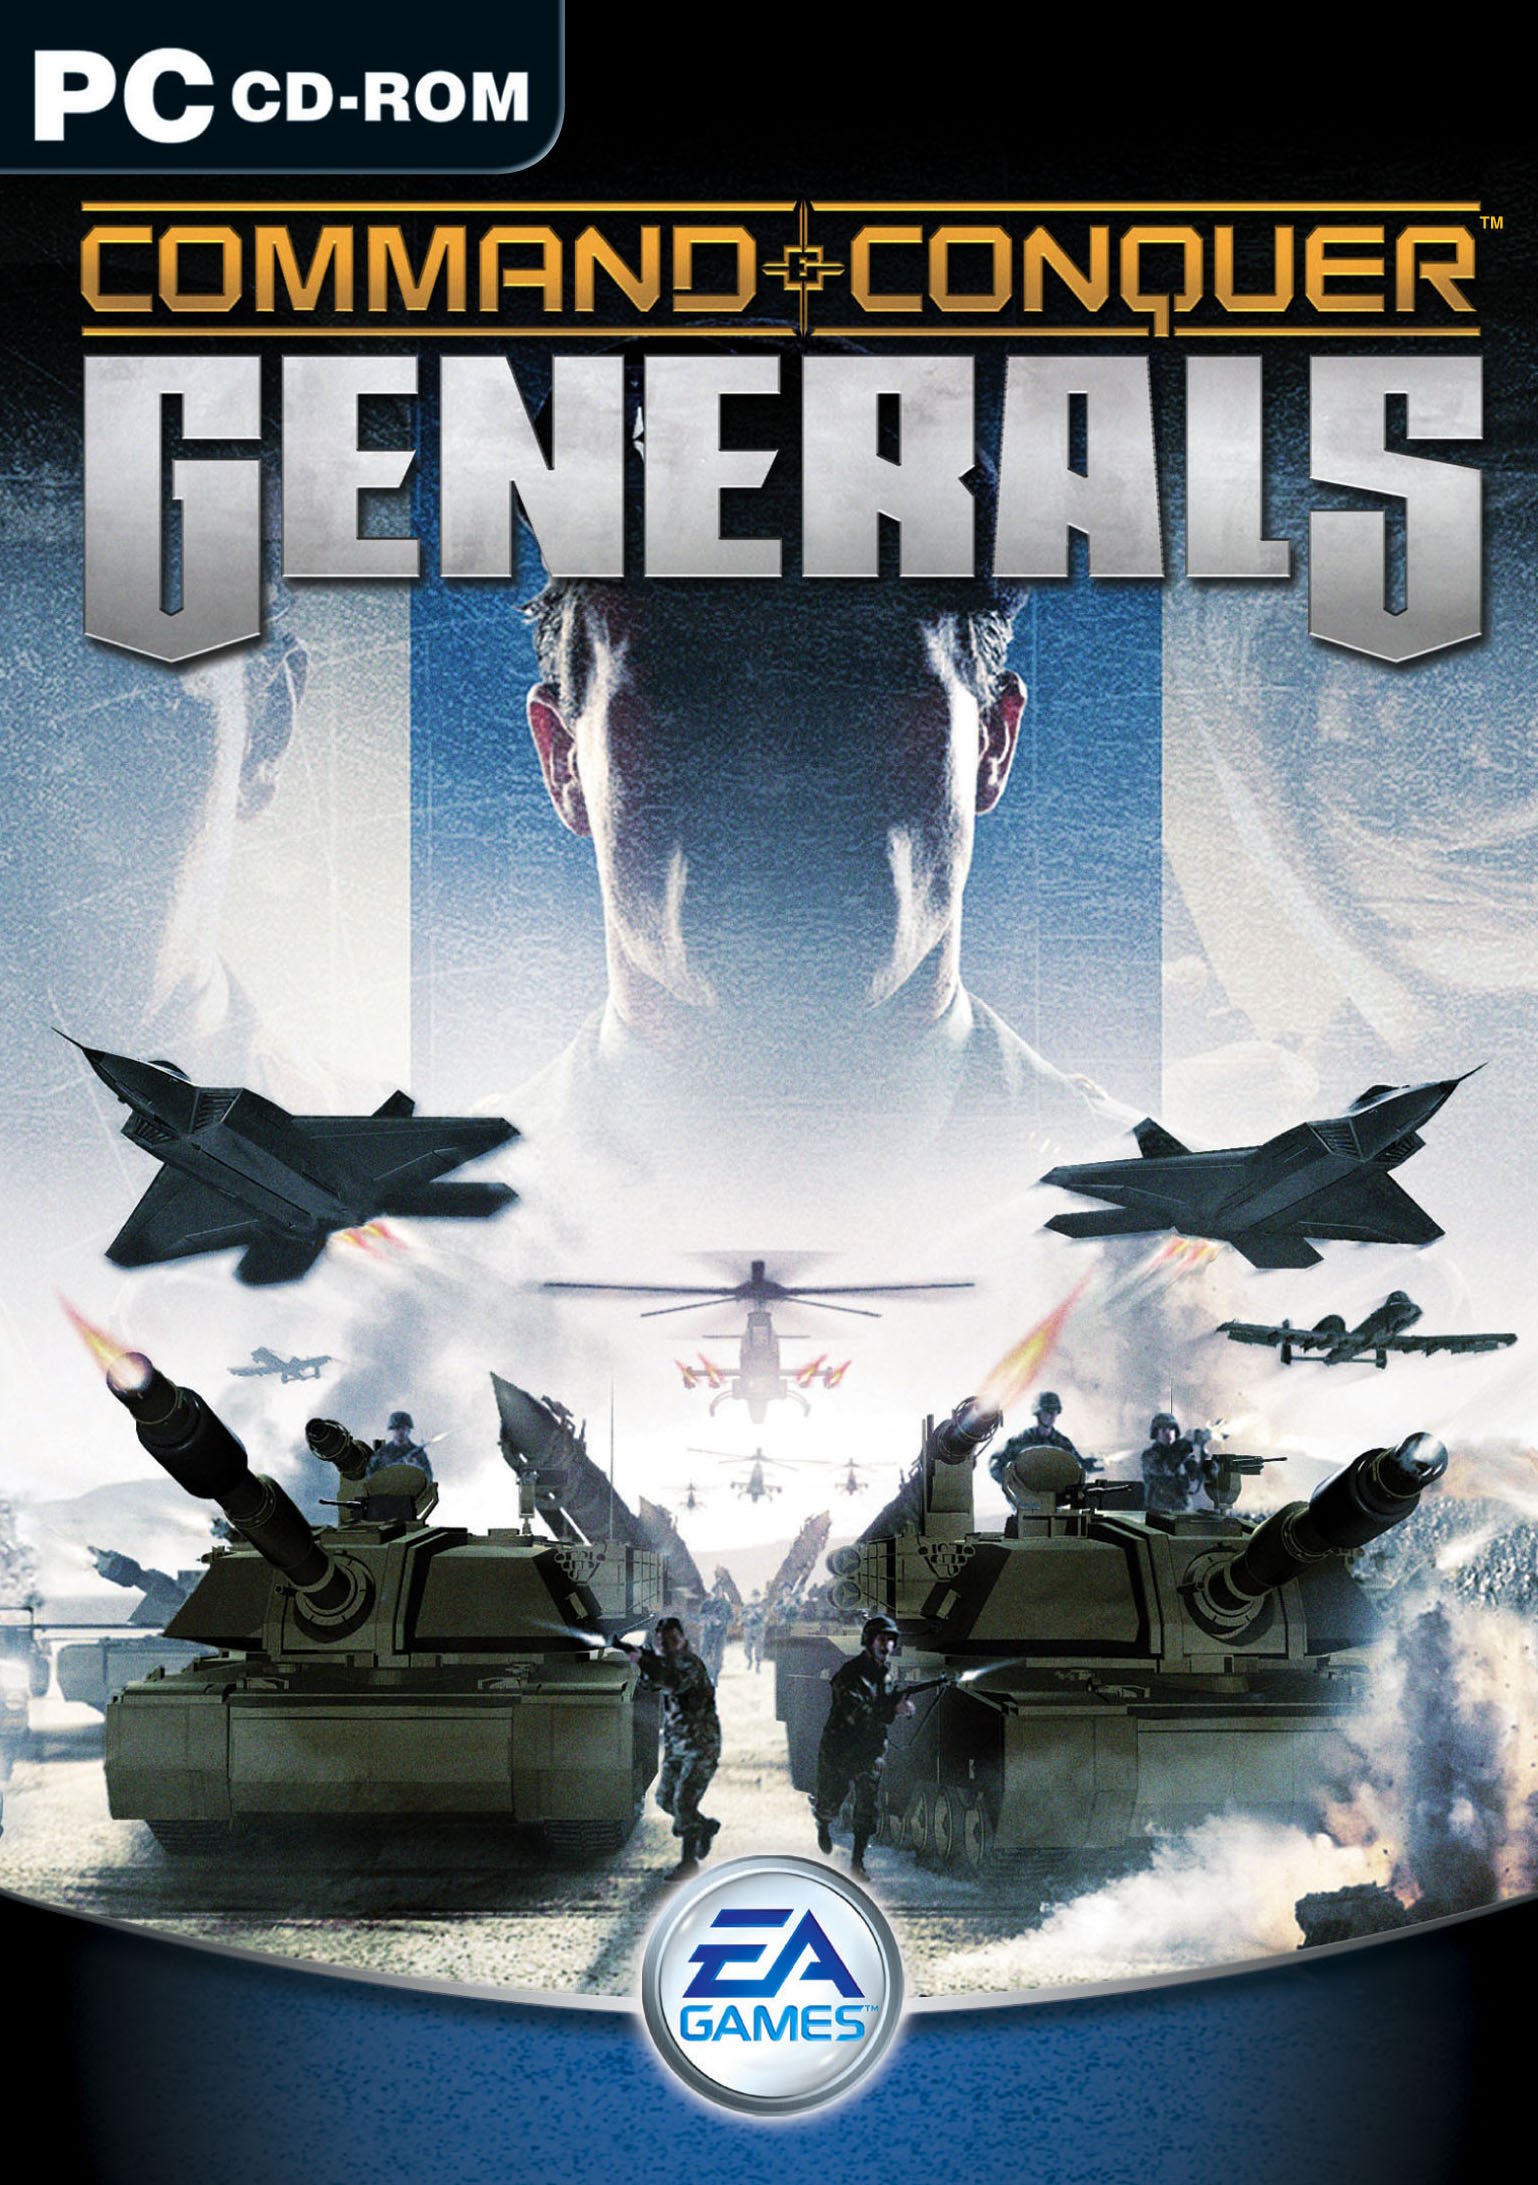 Command & Conquer Generals — StrategyWiki, the video game walkthrough and strategy guide wiki